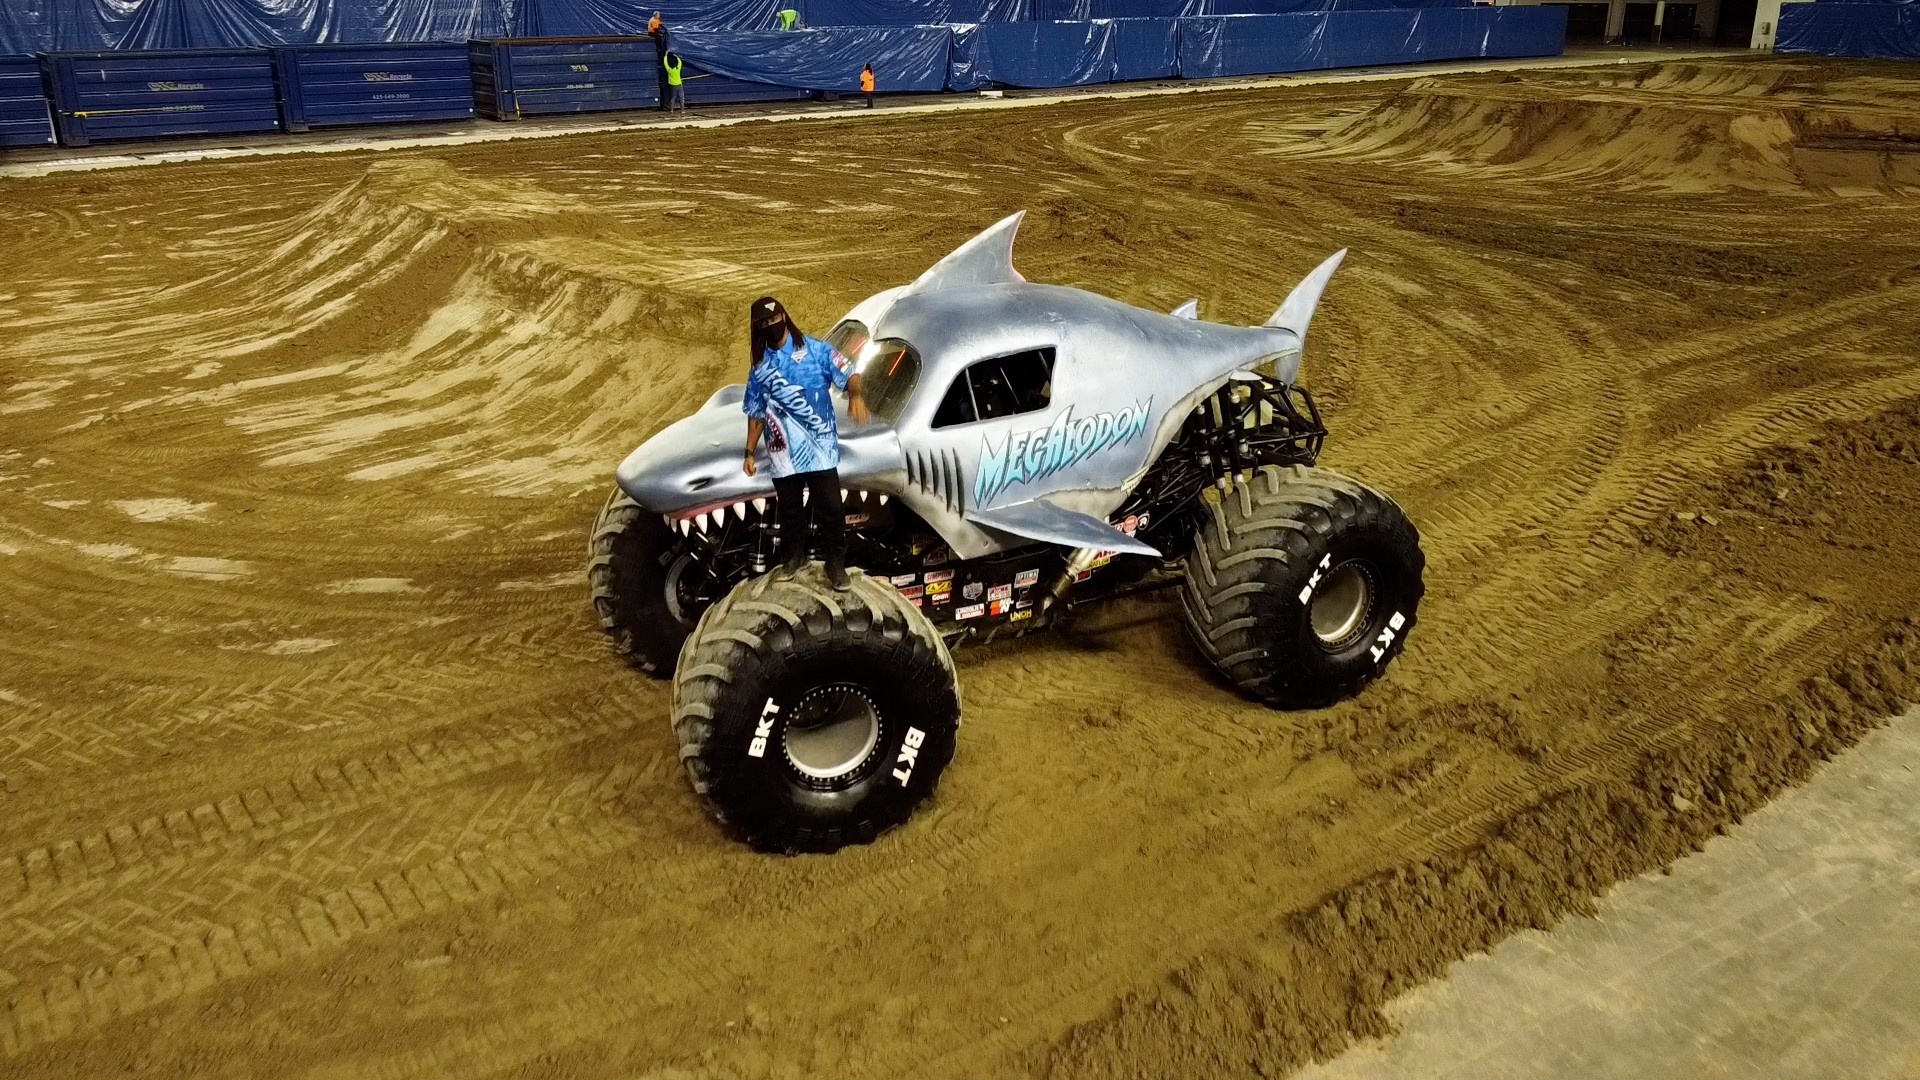 Meet the Monster Truck driver who is paving the way for the next